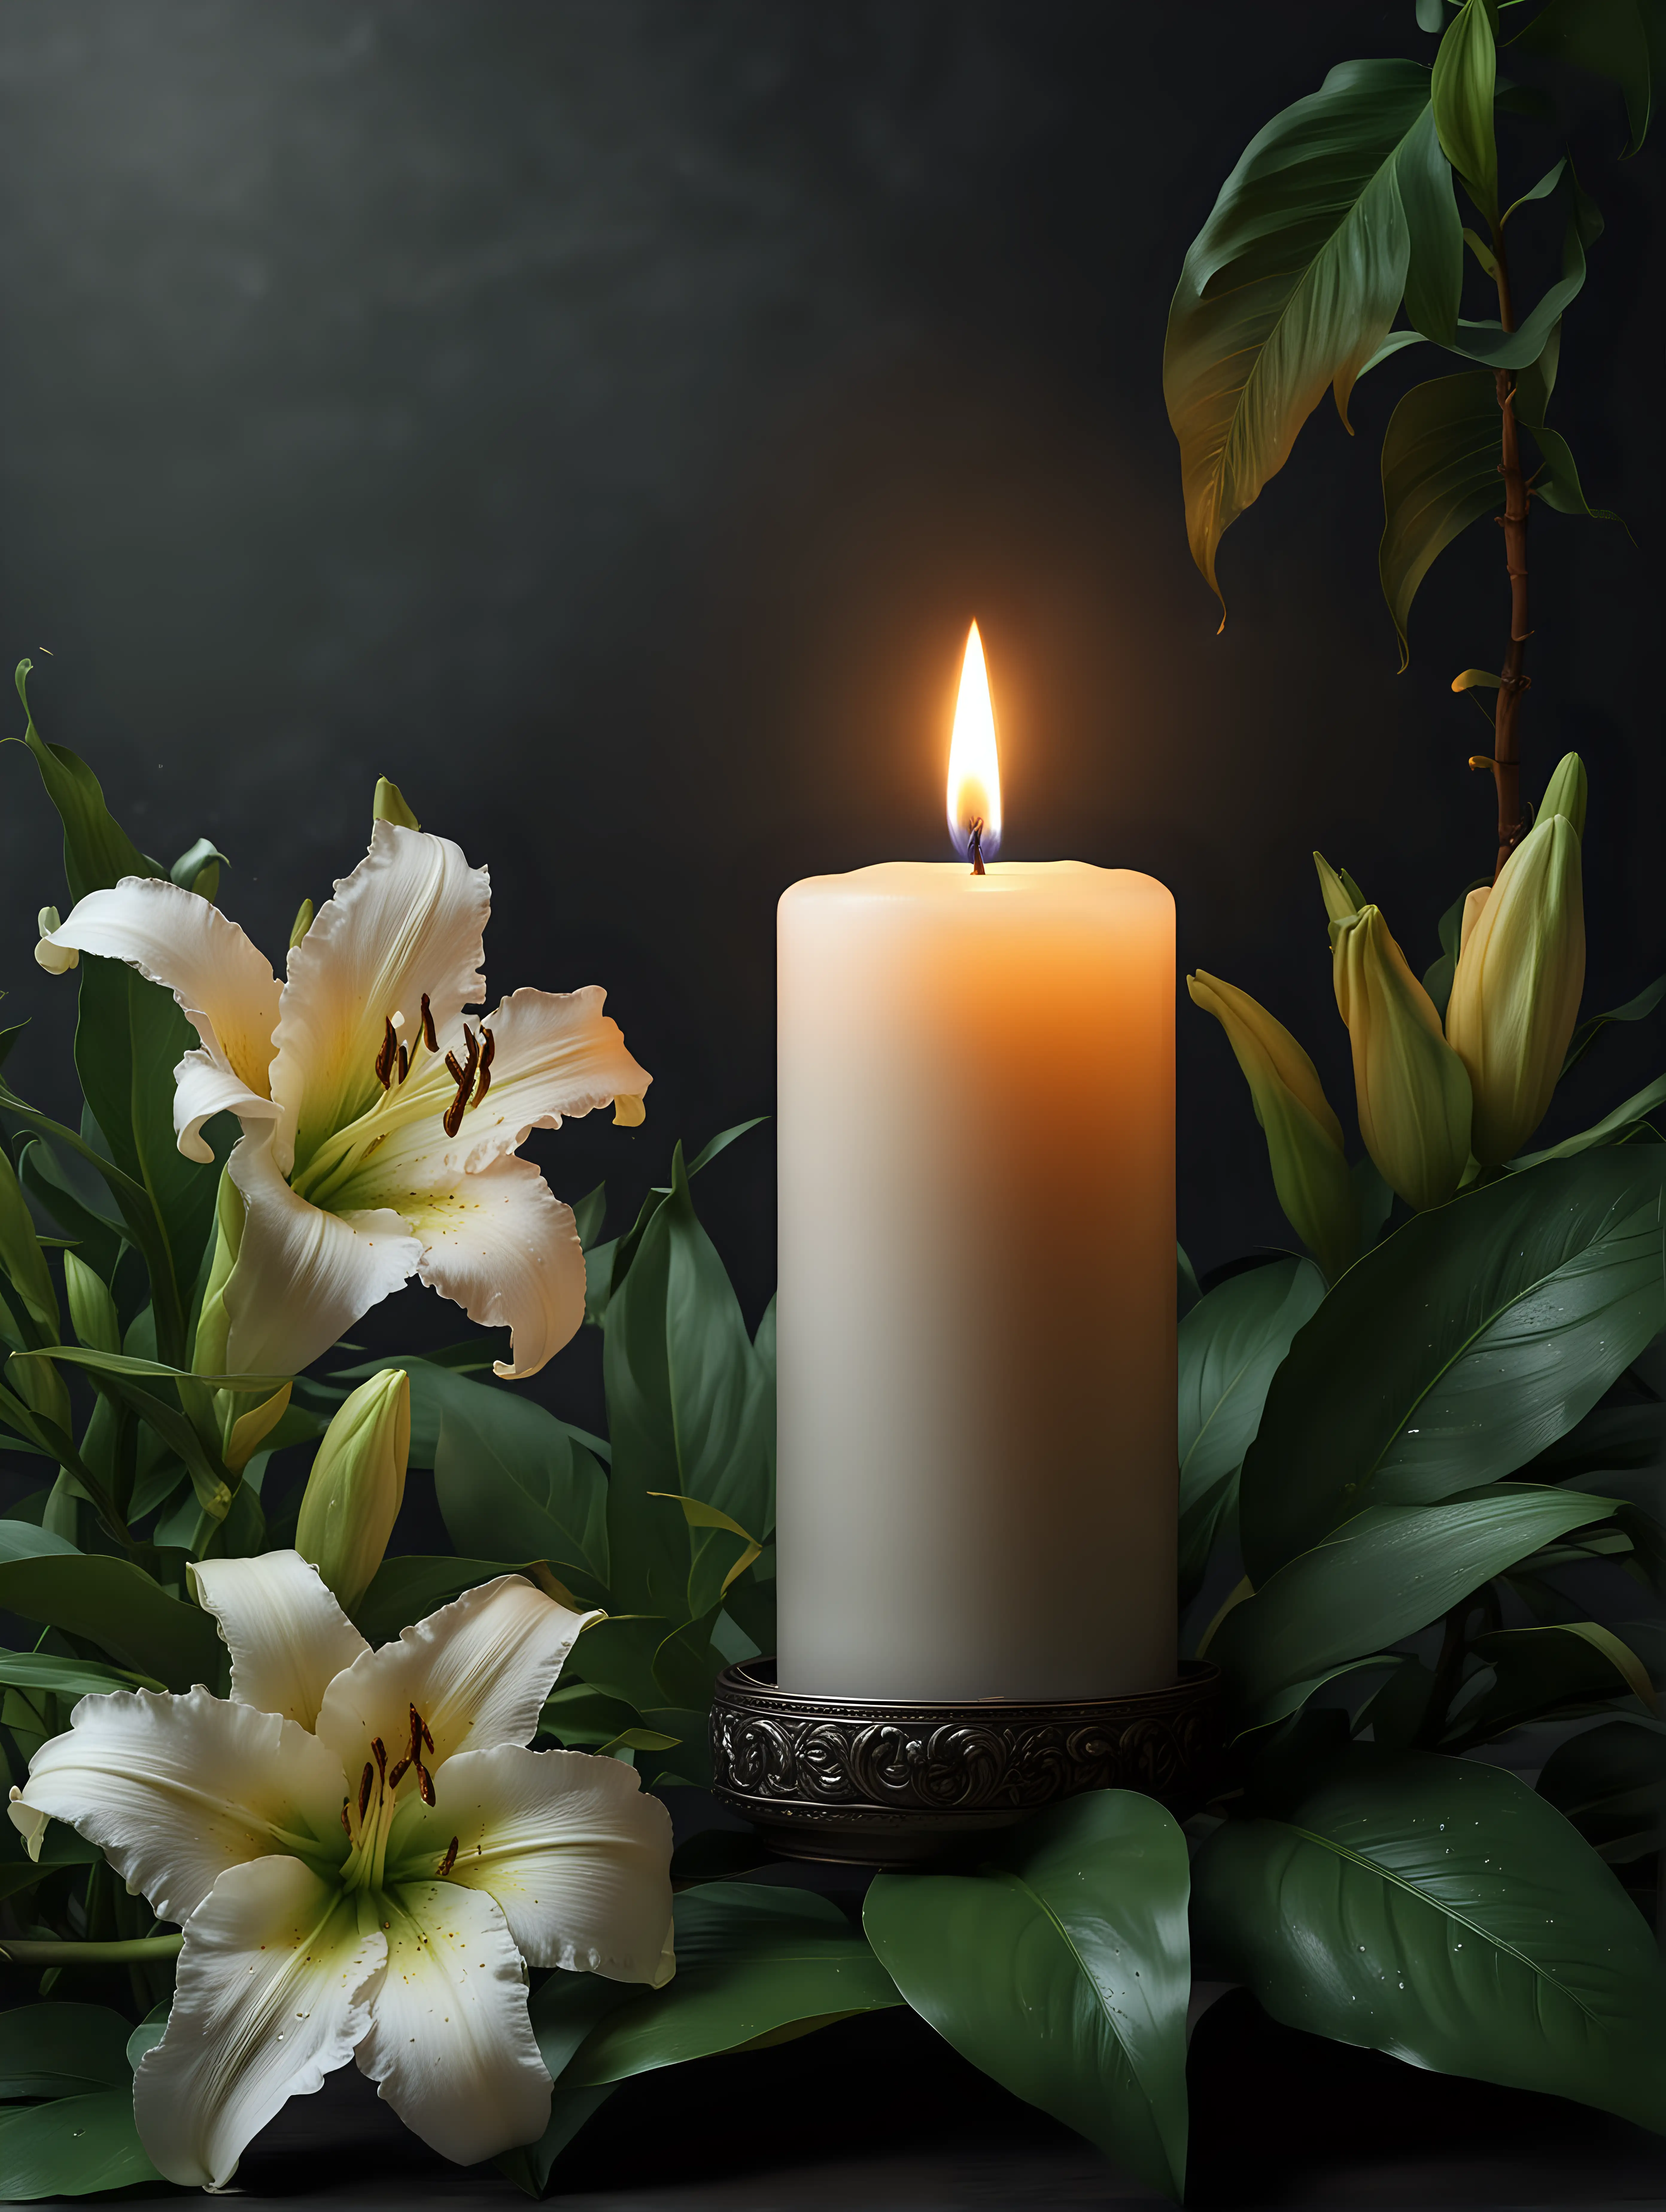 hyperrealistic picture with a burning candle, next to a lily branch and green leaves, blurred flowers in the dark large background